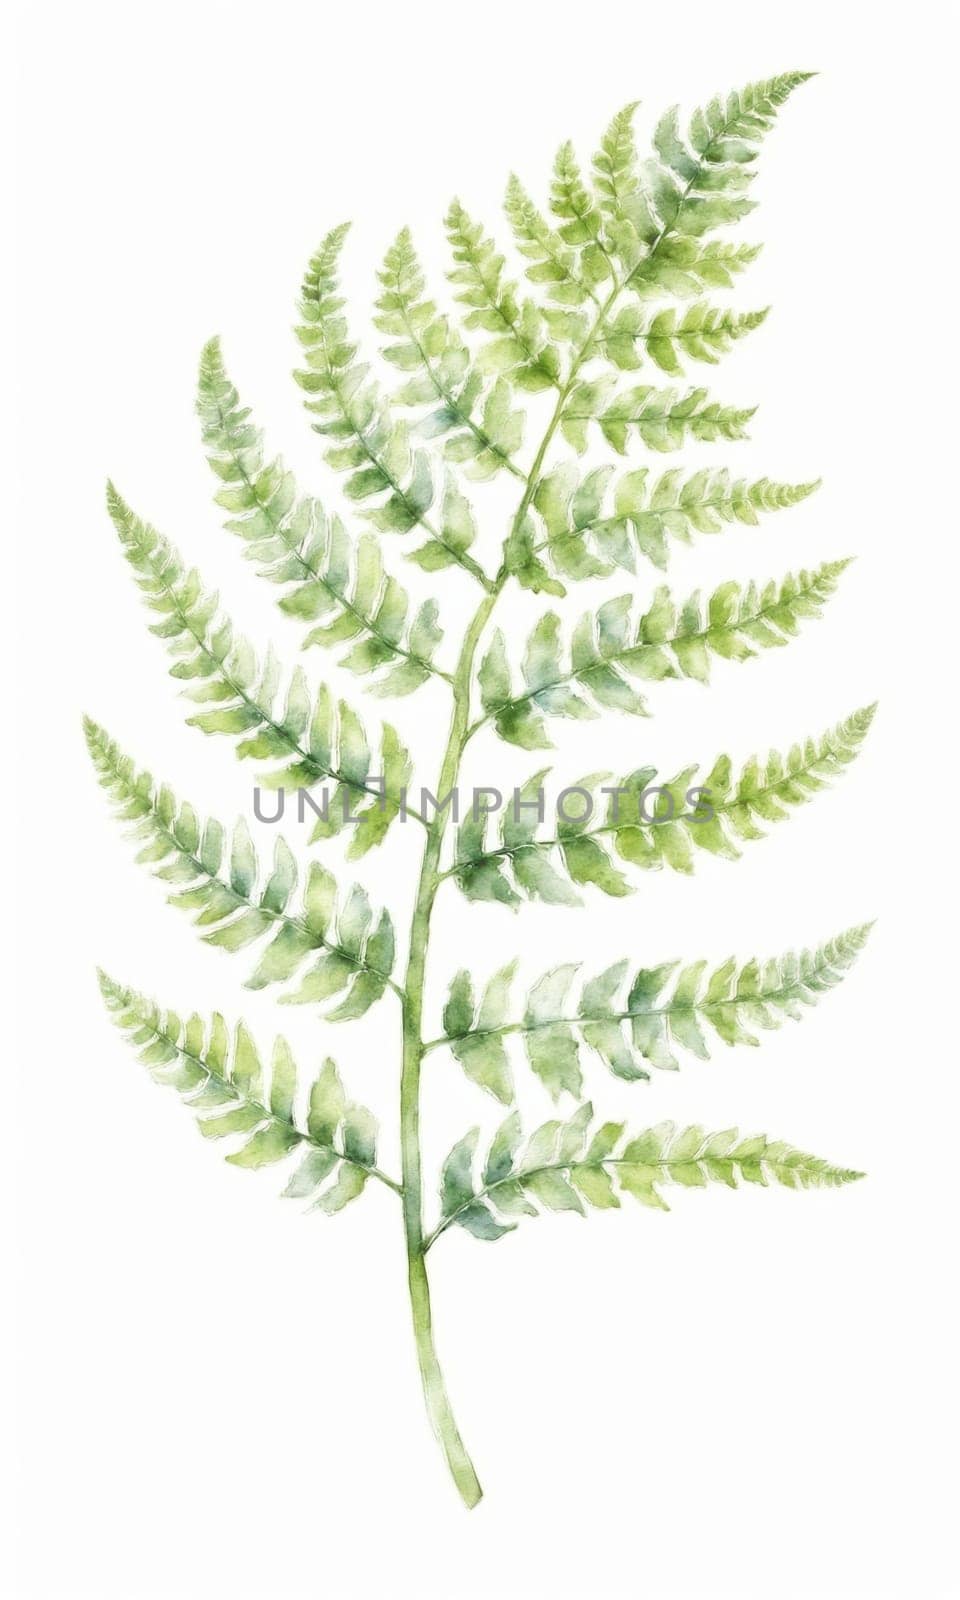 watercolor drawing of fern leaf on white background.